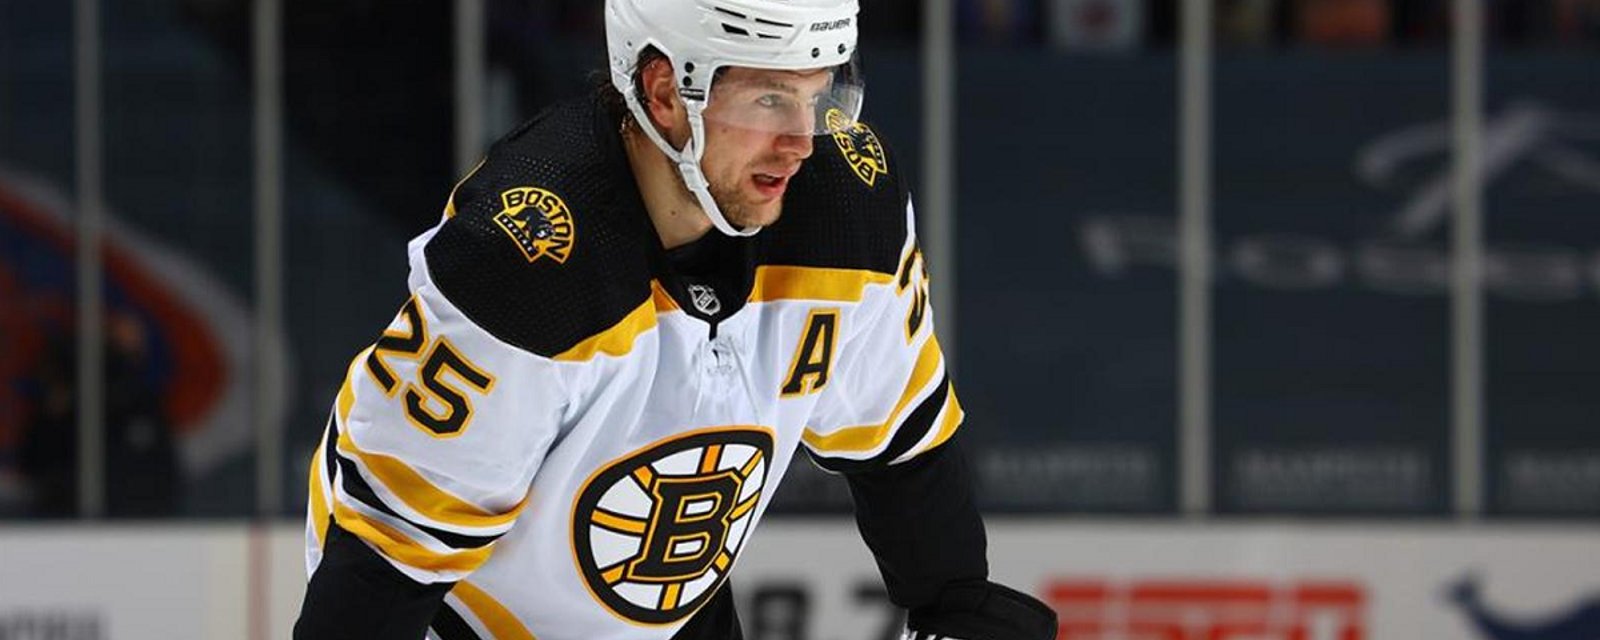 Bruins make 4 roster moves ahead of clash with Habs.